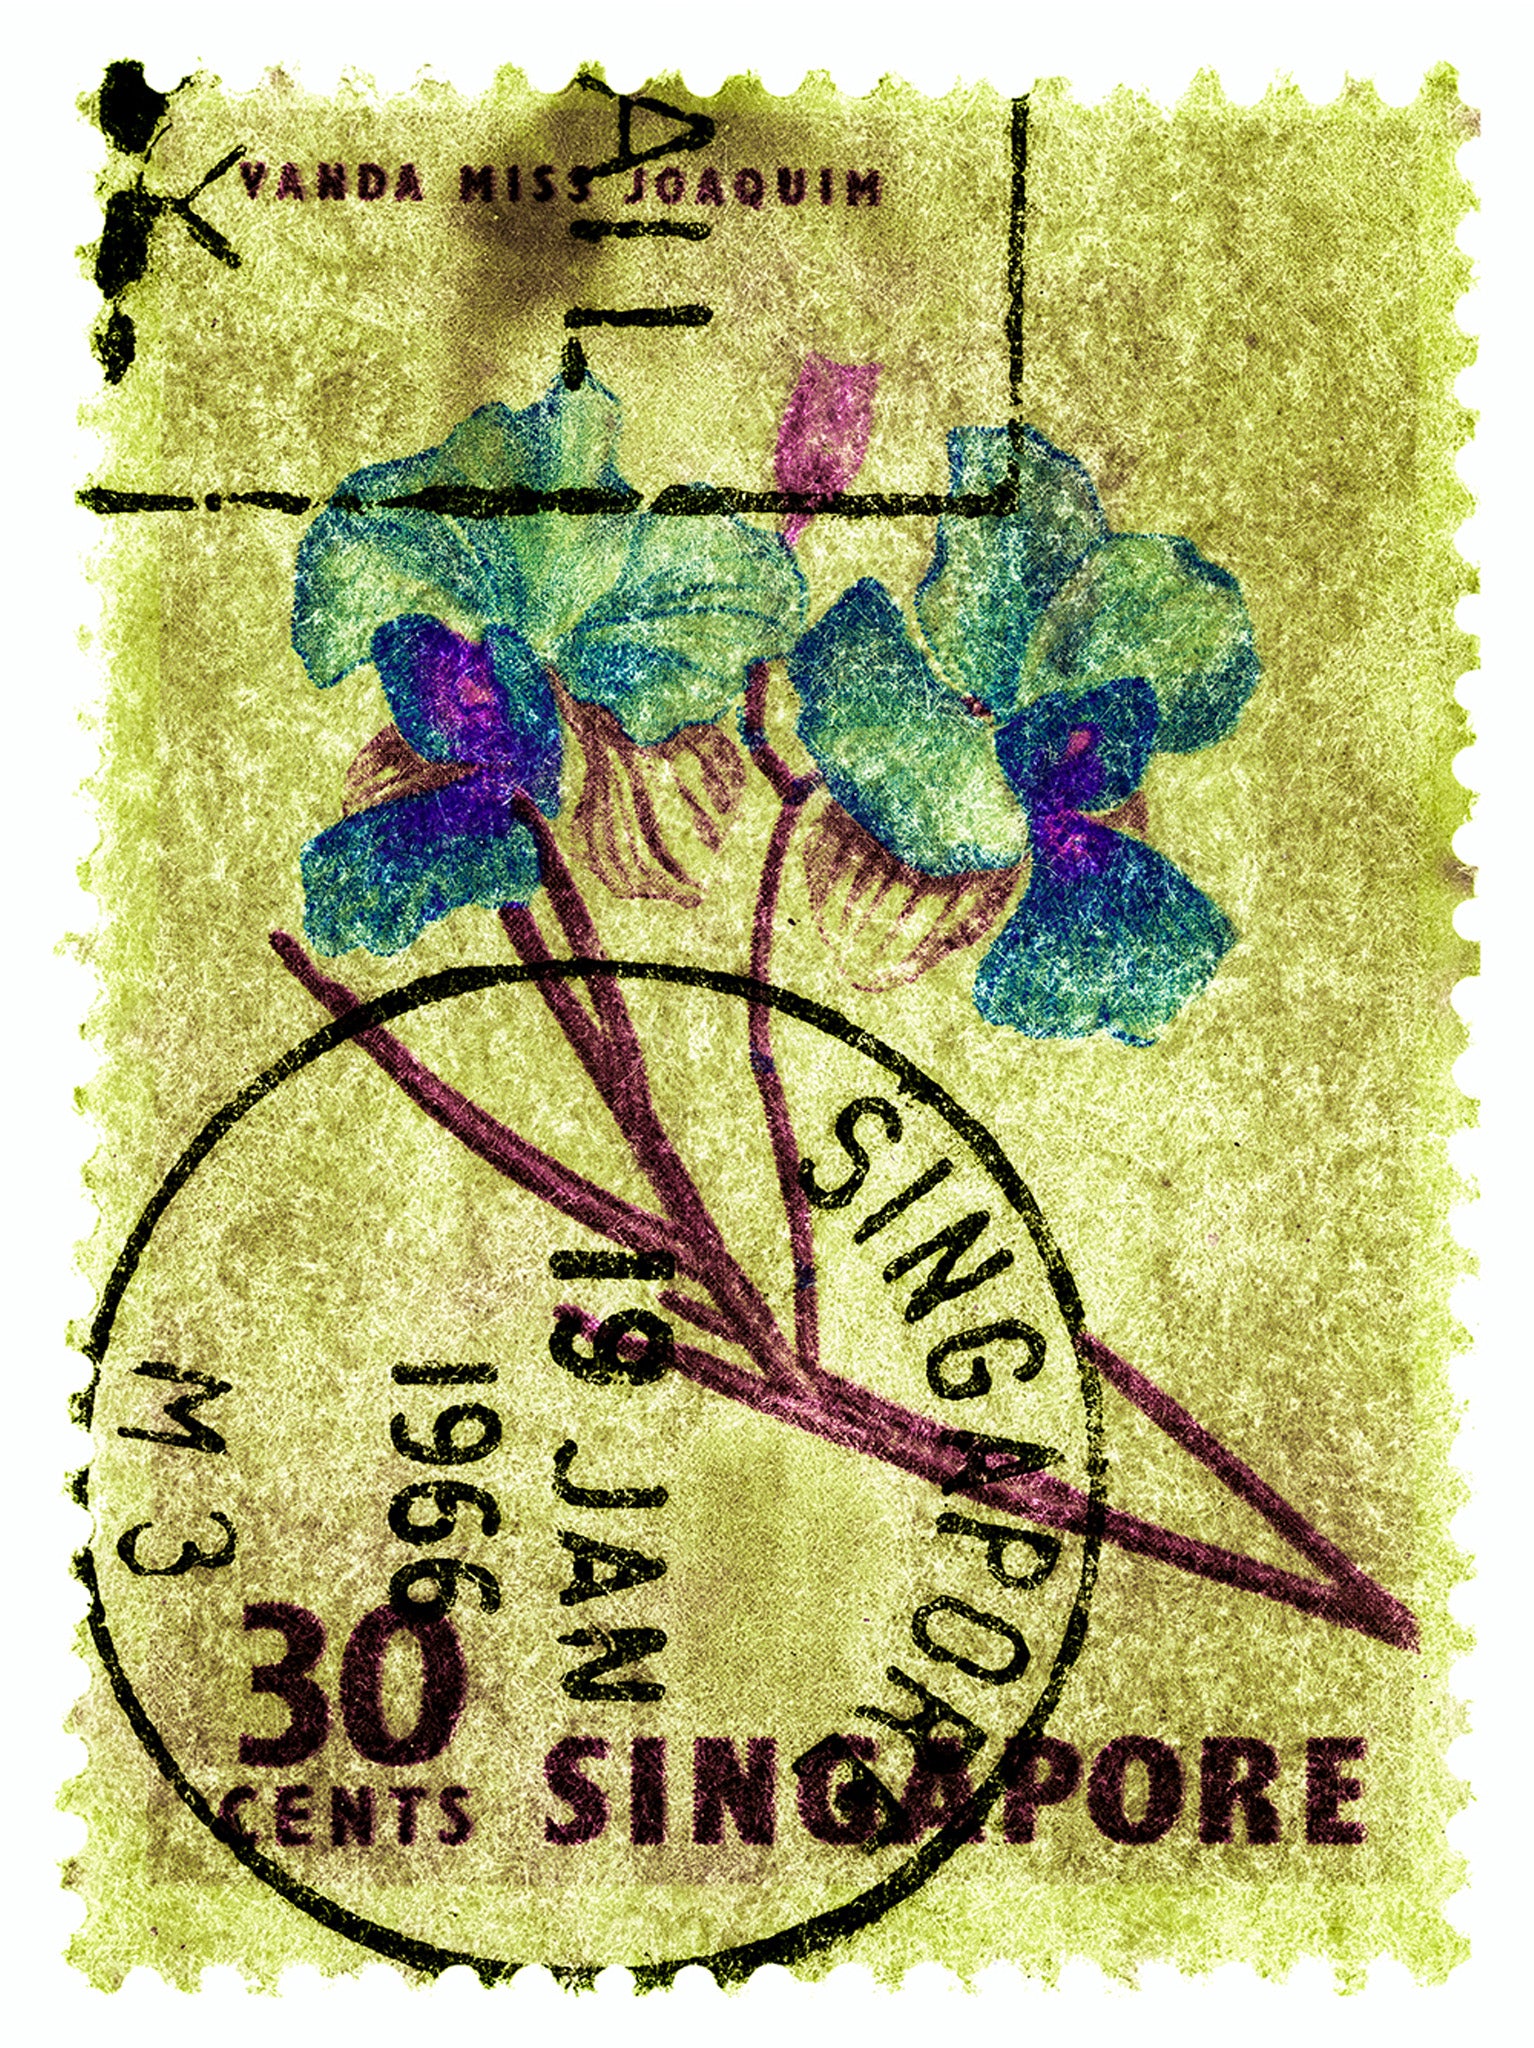 Singapore Stamp Collection '30 Cents Singapore Orchid Yellow'. These historic postage stamps that make up the Heidler & Heeps Stamp Collection, Singapore Series 'Postcards from Afar' have been given a twenty-first century pop art lease of life. The fine detailed tapestry of the original small postage stamp has been brought to life, made unique by the franking stamp and Heidler & Heeps specialist darkroom process.